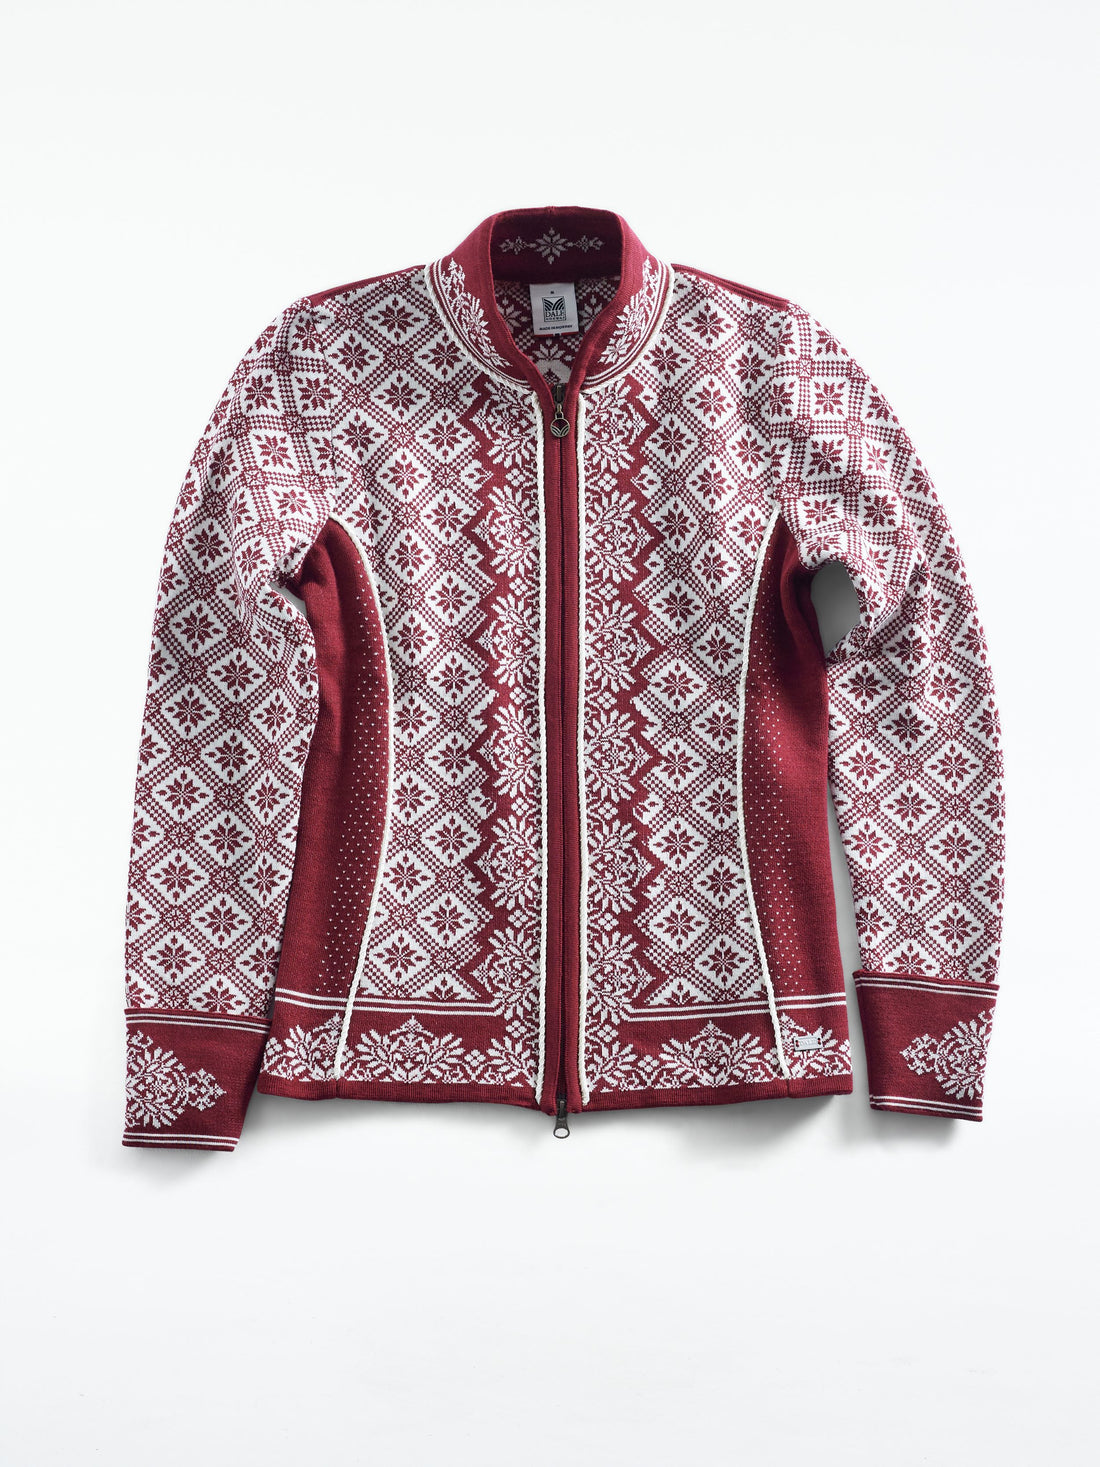 Dale of Norway - Christiania Jacket - Ruby Red